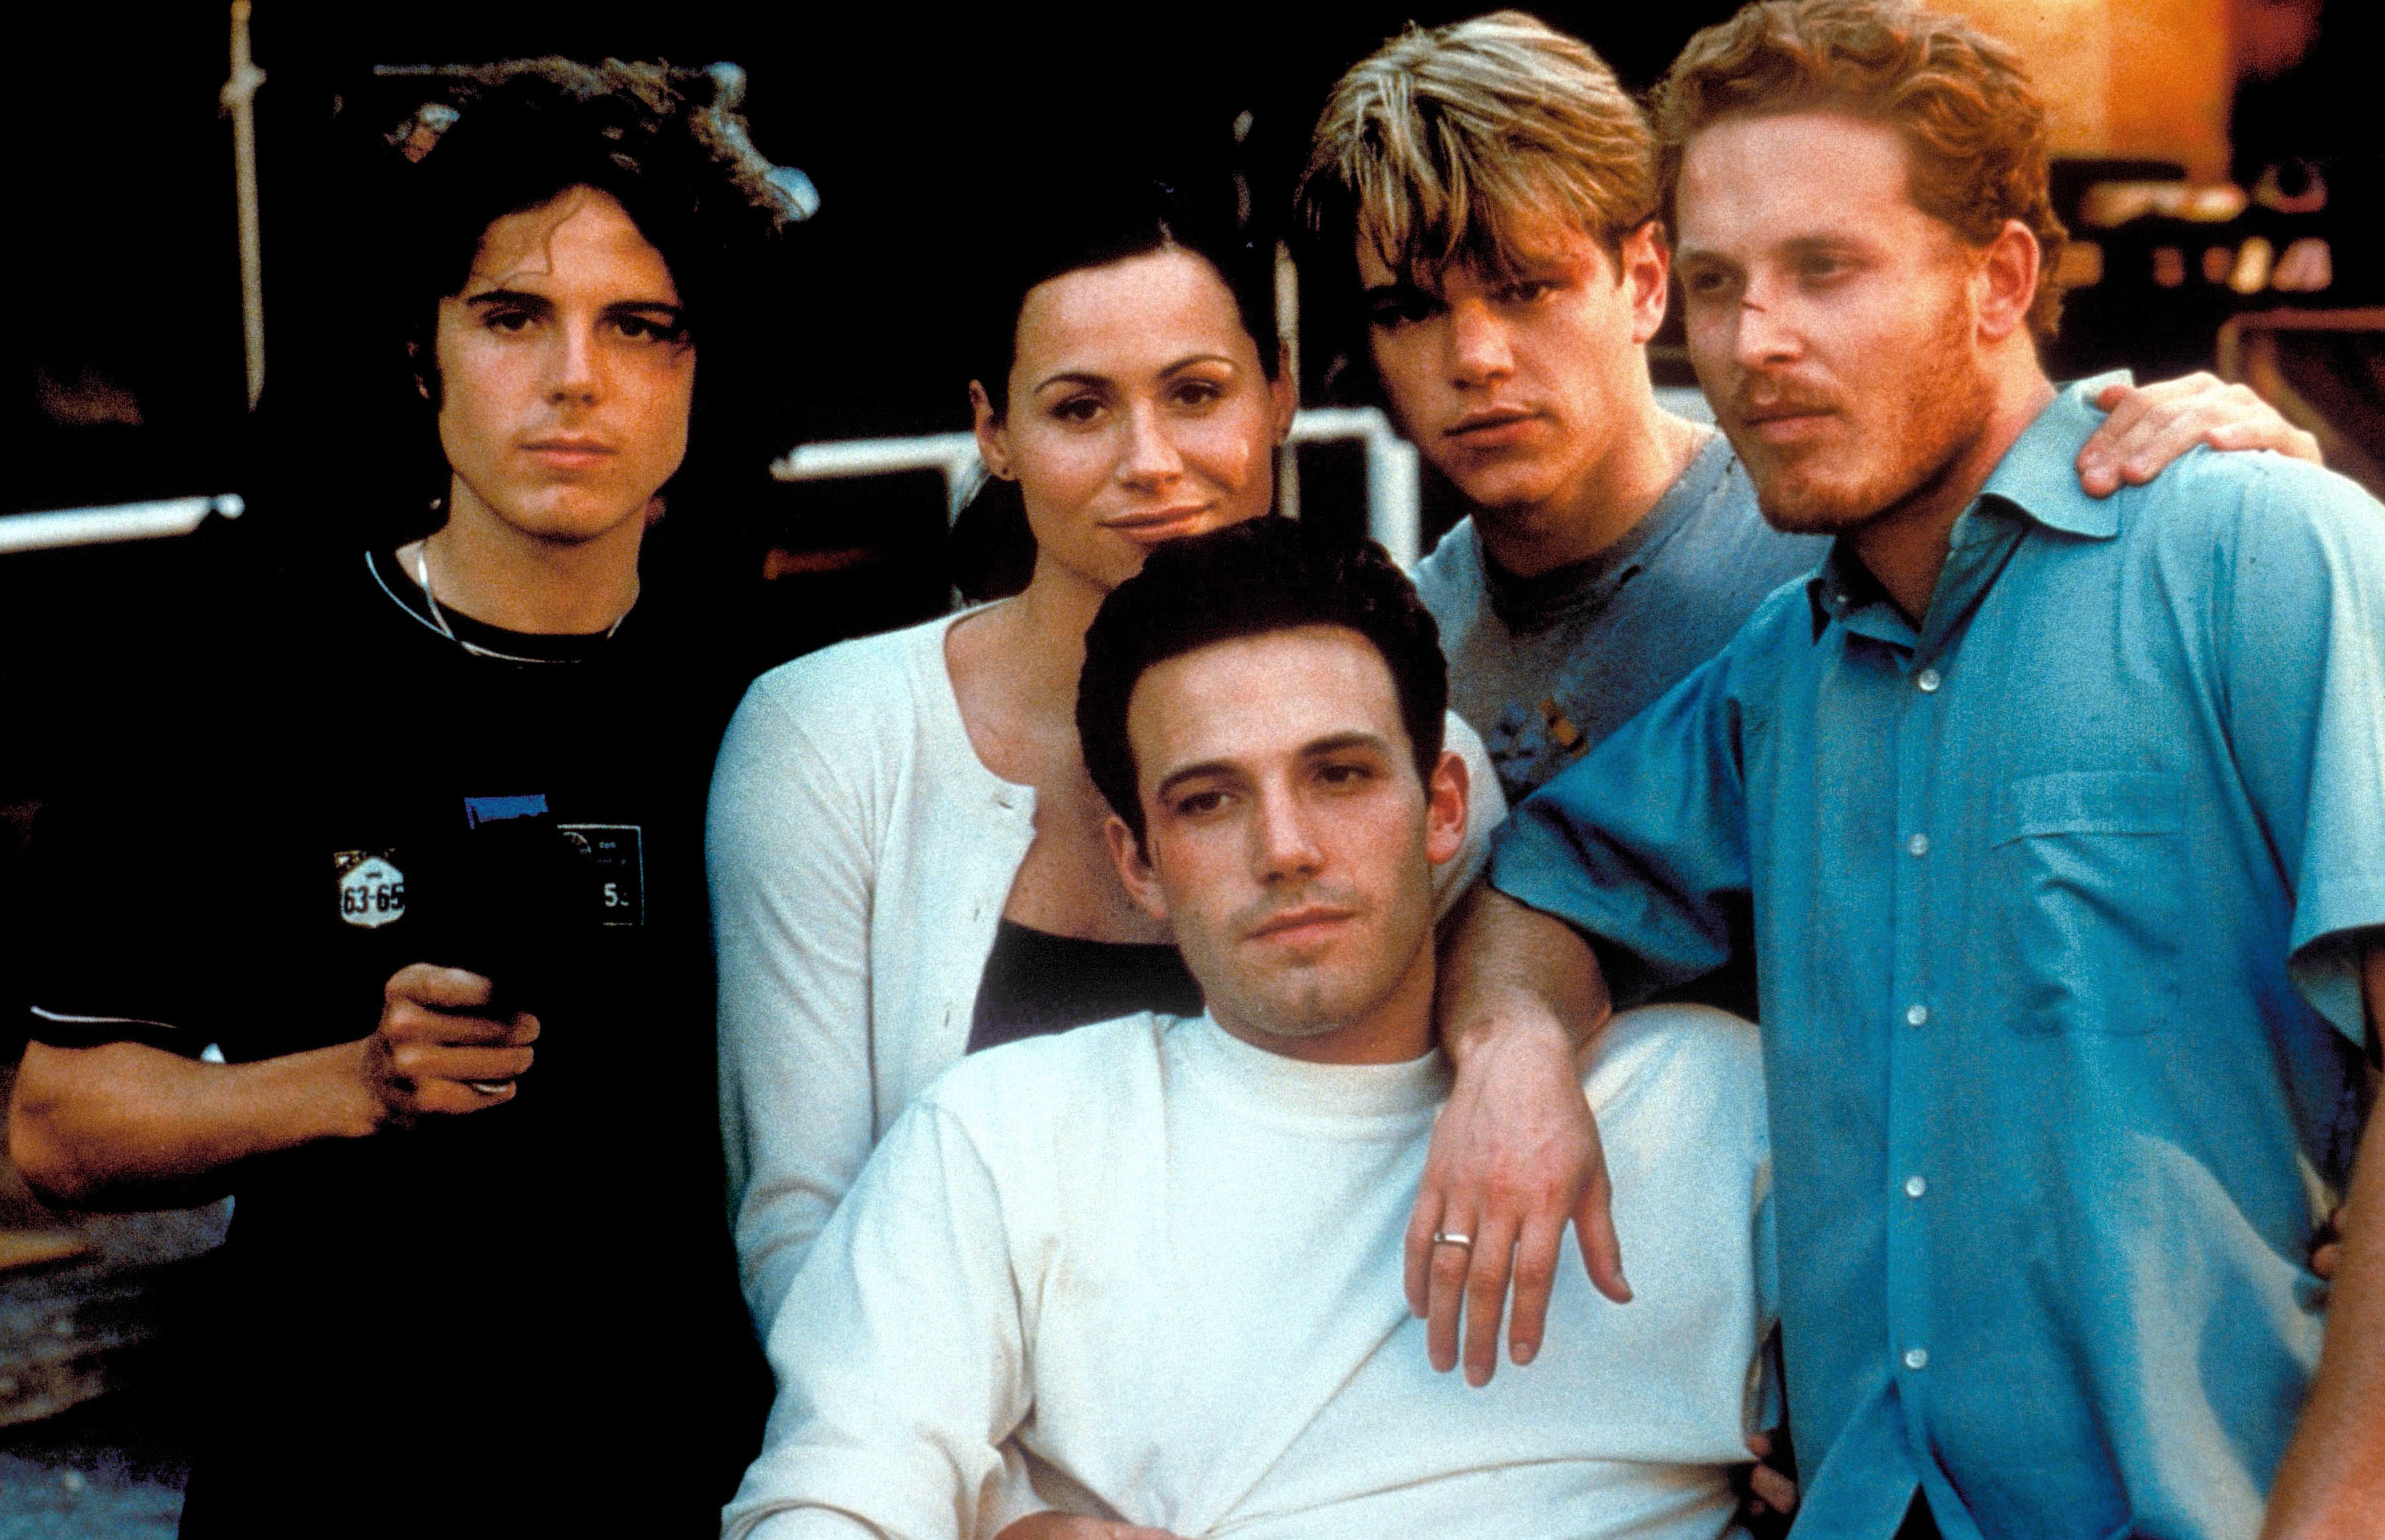 Ben Affleck, Matt Damon, Cole Hauser, Minnie Driver, and Casey Affleck pose closely together in casual attire